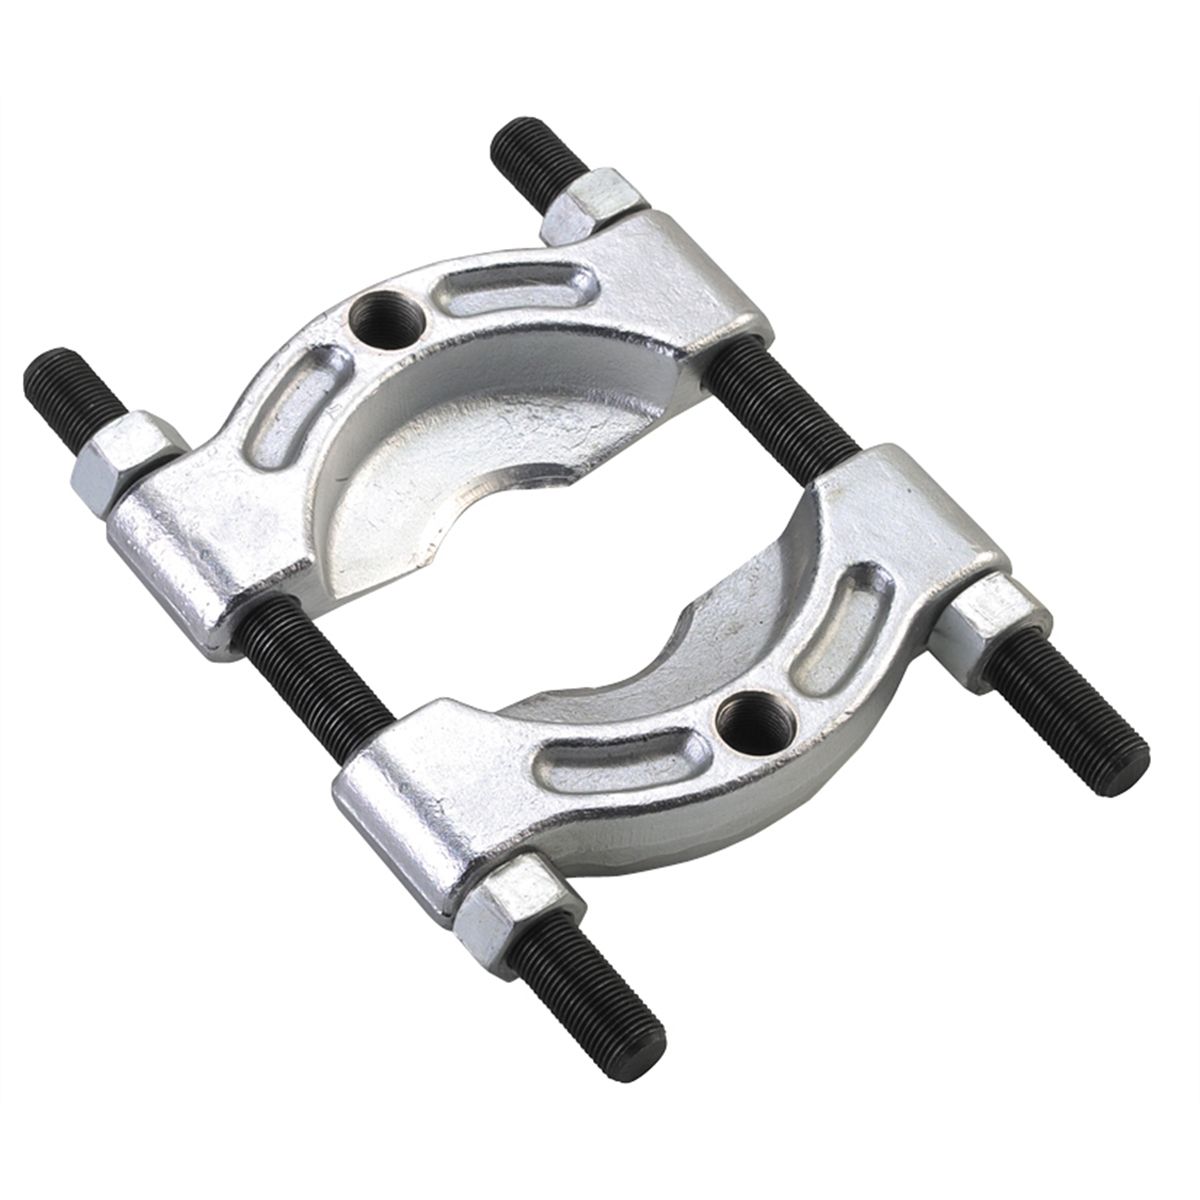 Bearing Remove-Installer High Performance Steel Steering Hub Carrier Installation and Removal Tool for 2~14mm Bearing Black 